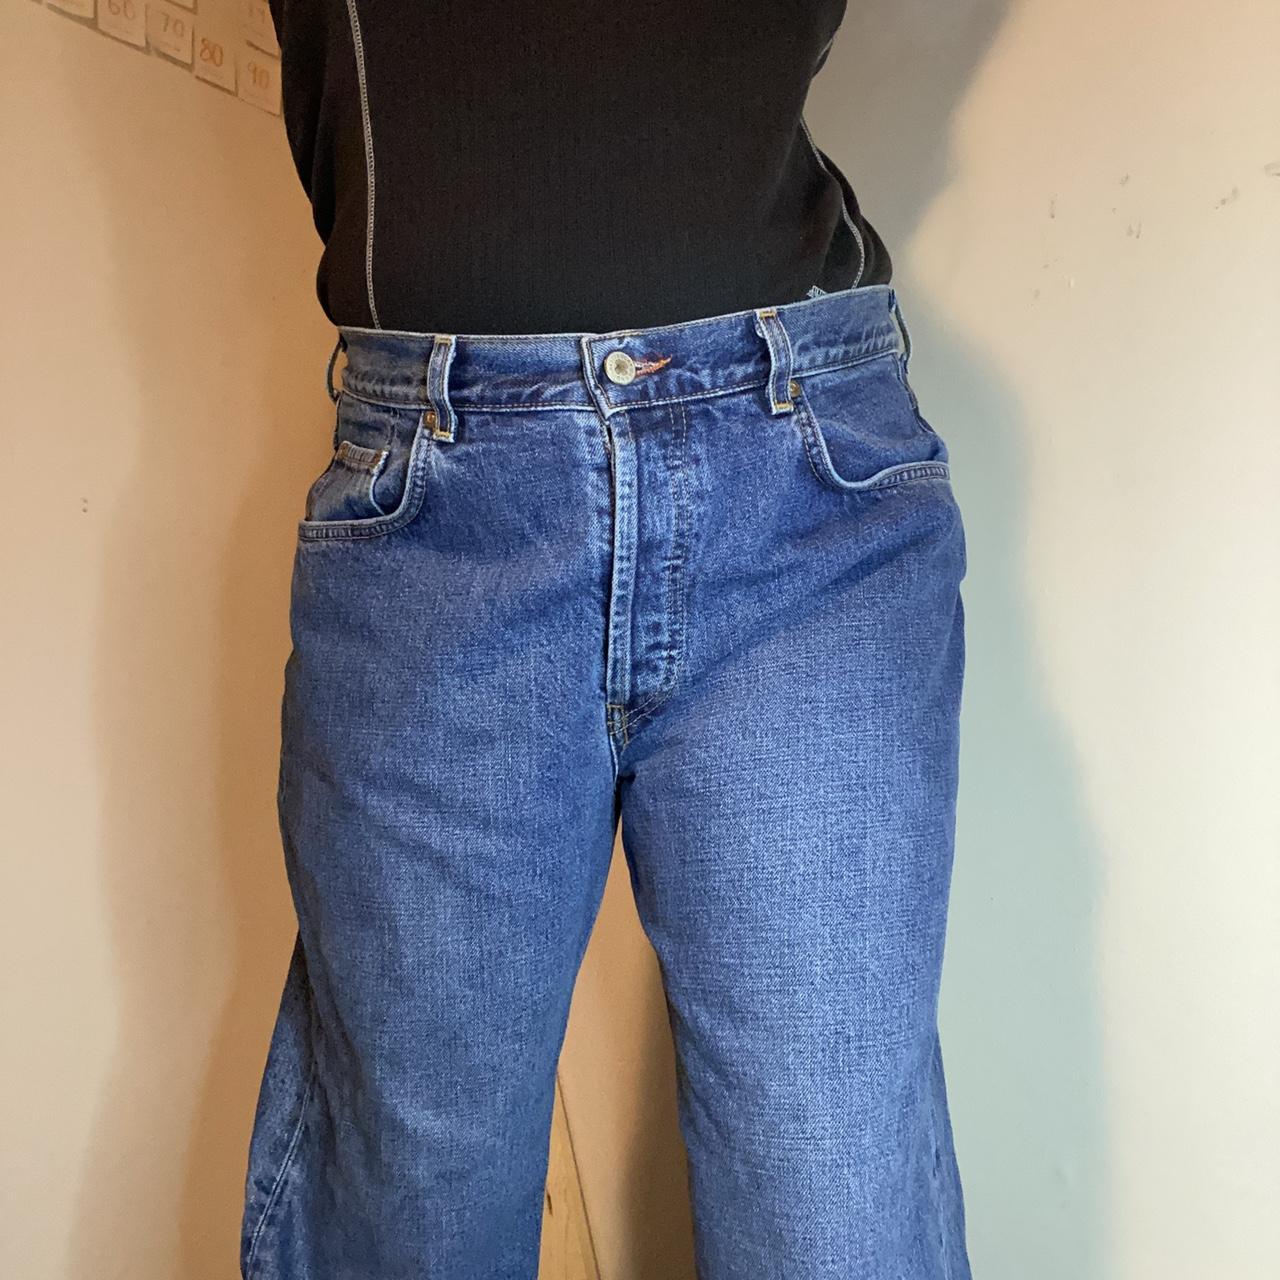 vintage 90s/y2k lucky brand dungarees jeans! 🍀marked